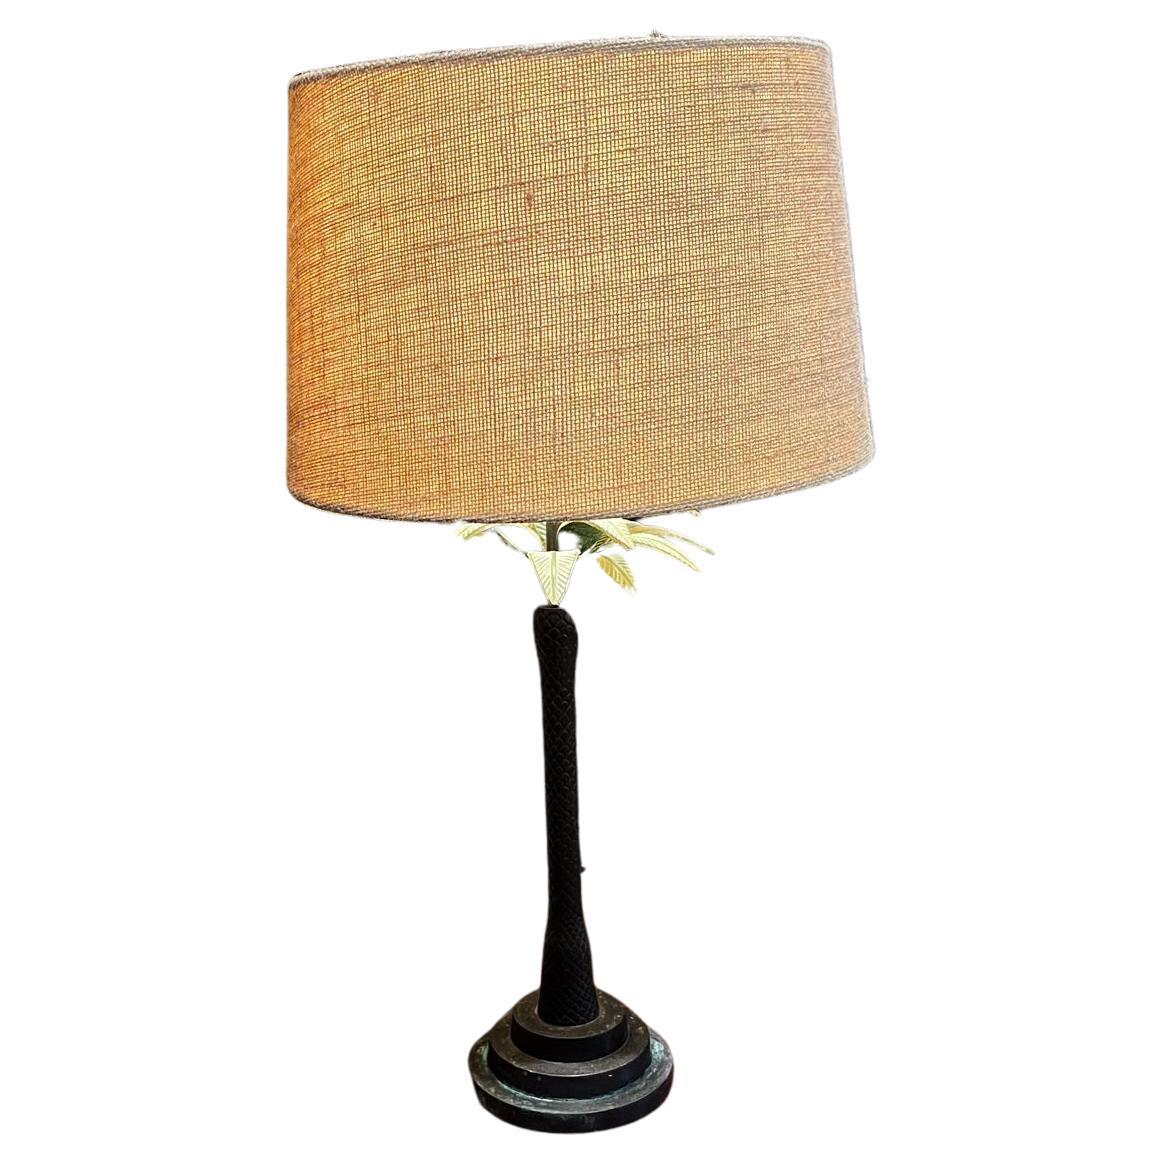 Maitland Smith Modern Metal Palm Tree Table Lamp Faux Bronze
Unmarked.
21.5 tall to socket Diameter 9
Preowned vintage unrestored condition
No shade is included.
Refer to all images.